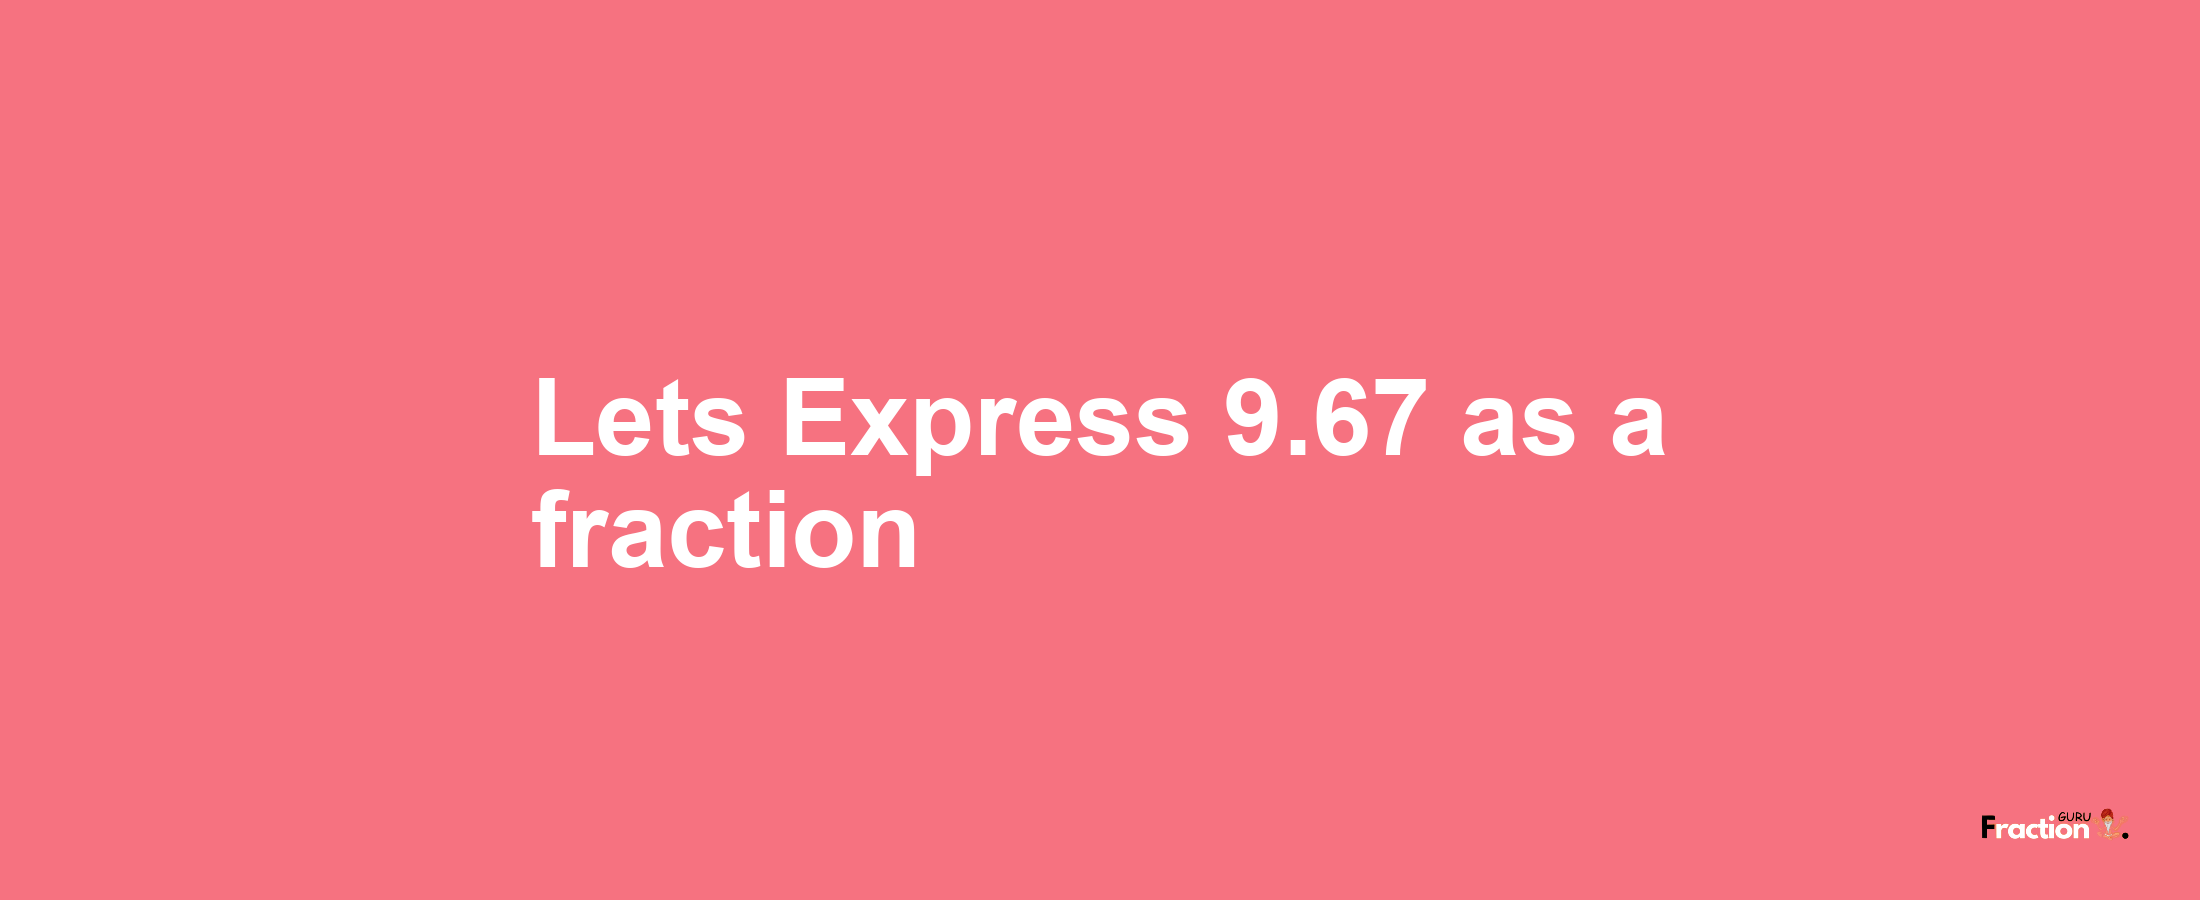 Lets Express 9.67 as afraction